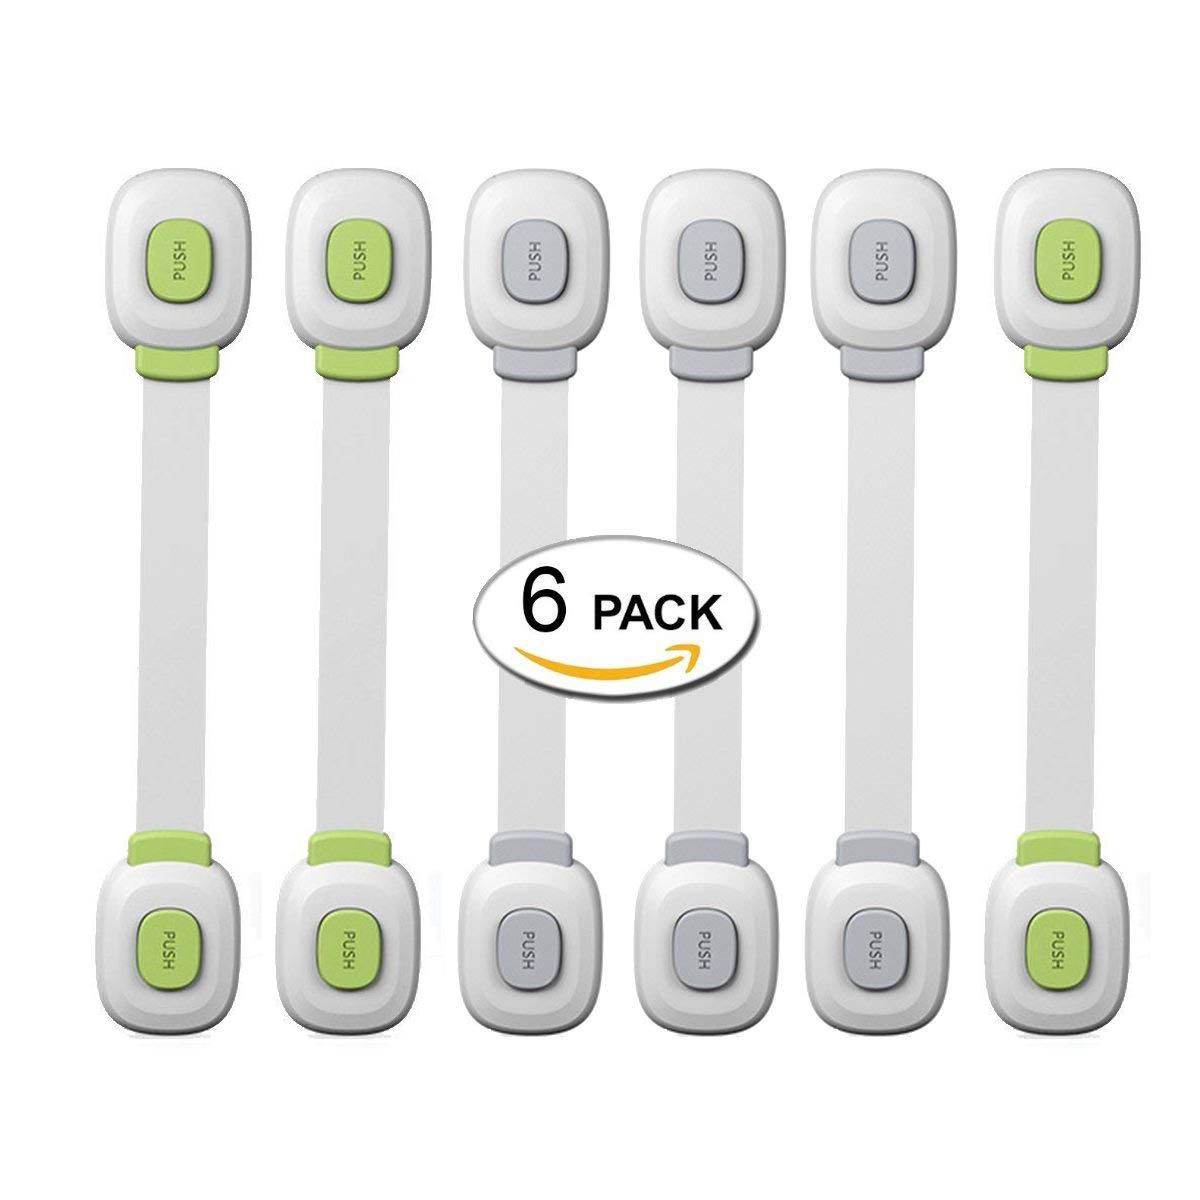 Drawers 6-Pack Baby Safety Locks Child Proof Cabinets White Tools Not Required Fridge and Oven Toilet Seat Appliances 3M Adhesive with Adjustable Strap and Latch System 